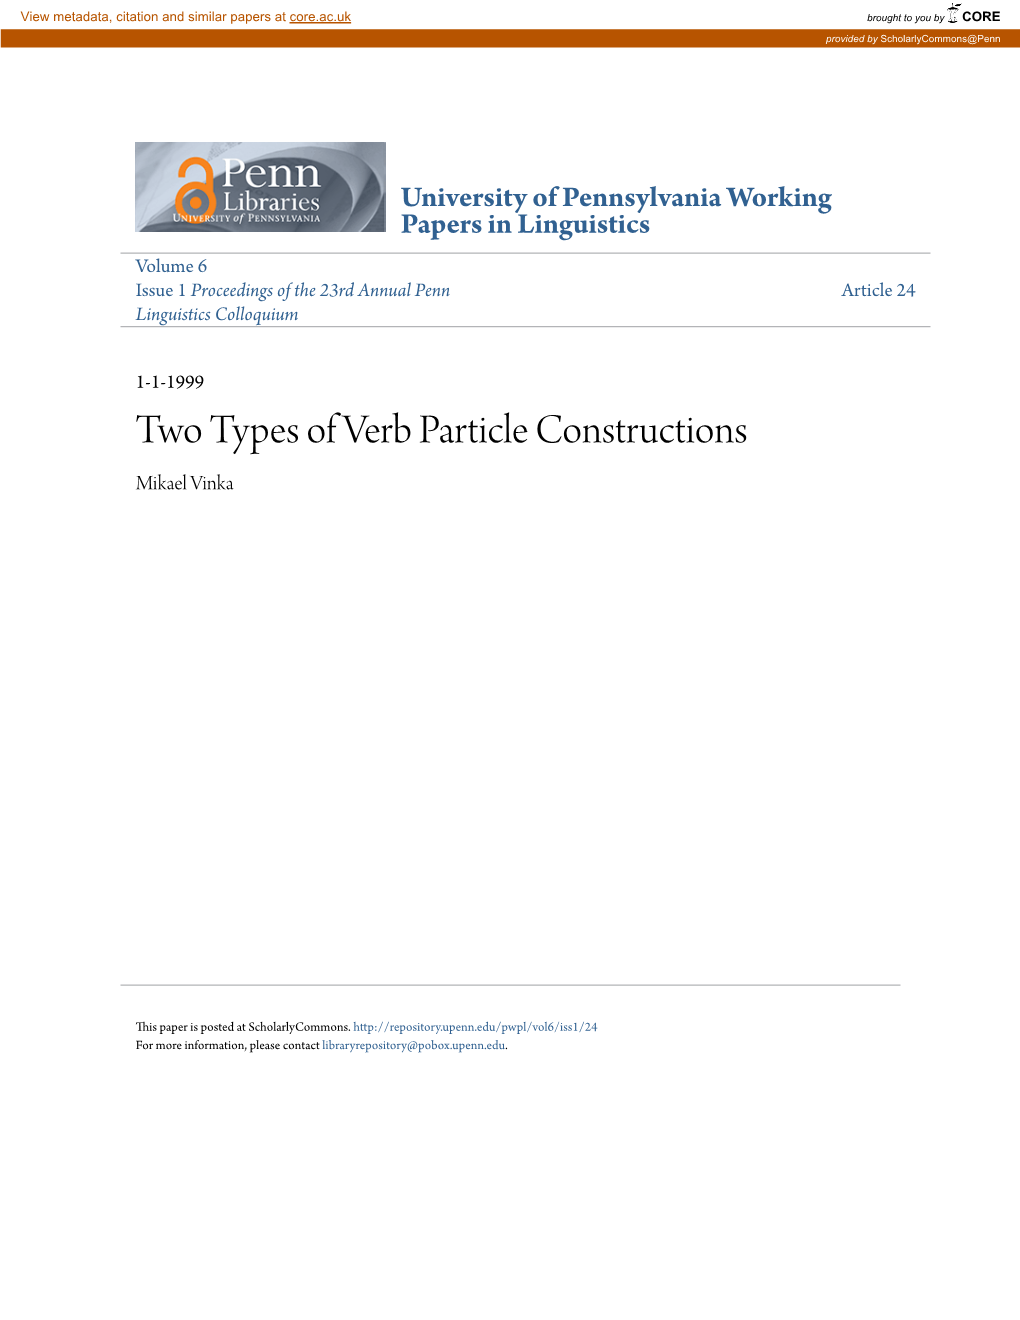 Two Types of Verb Particle Constructions Mikael Vinka